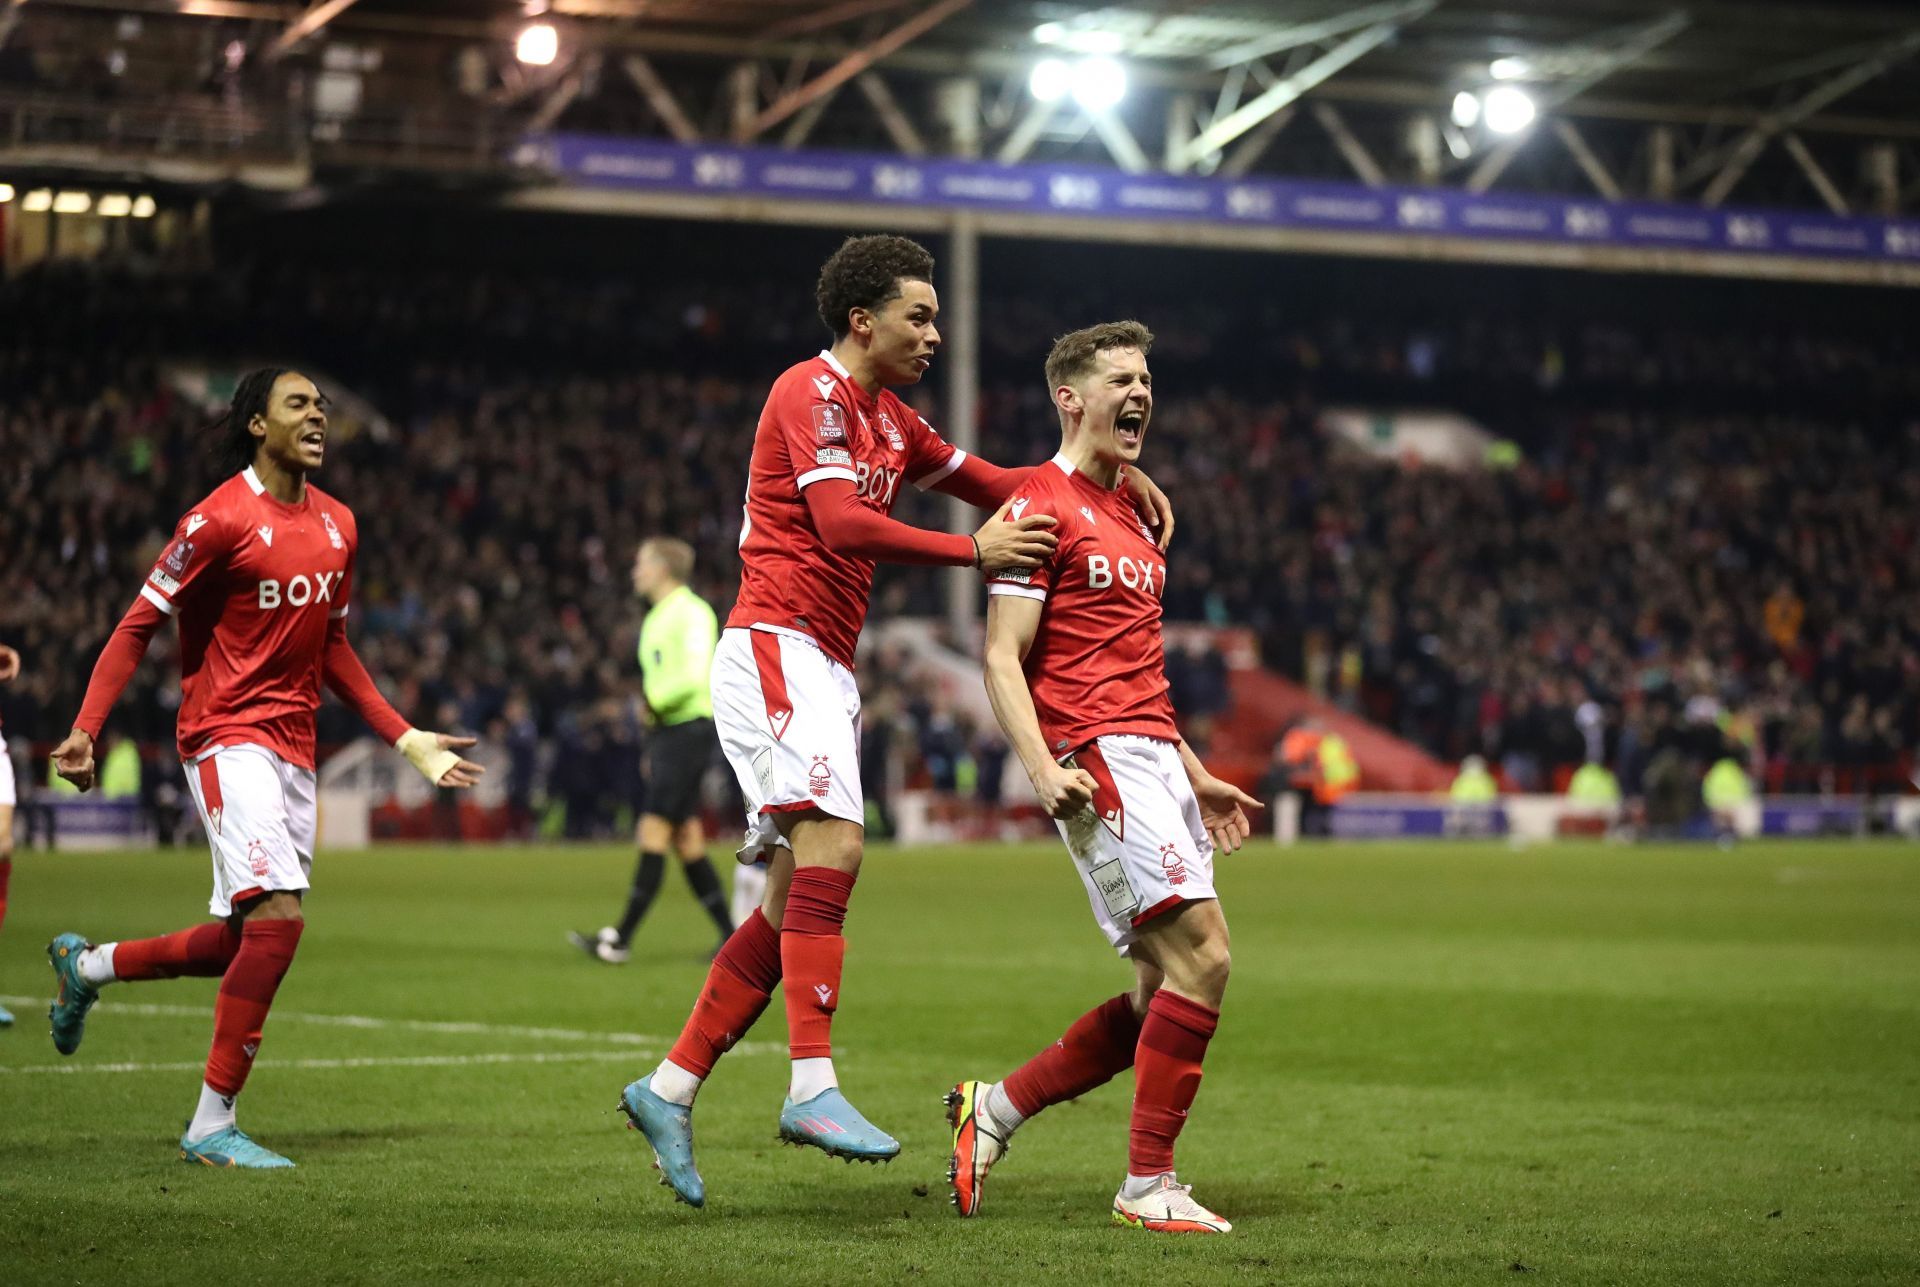 Nottingham Forest will look to continue their good form with a win